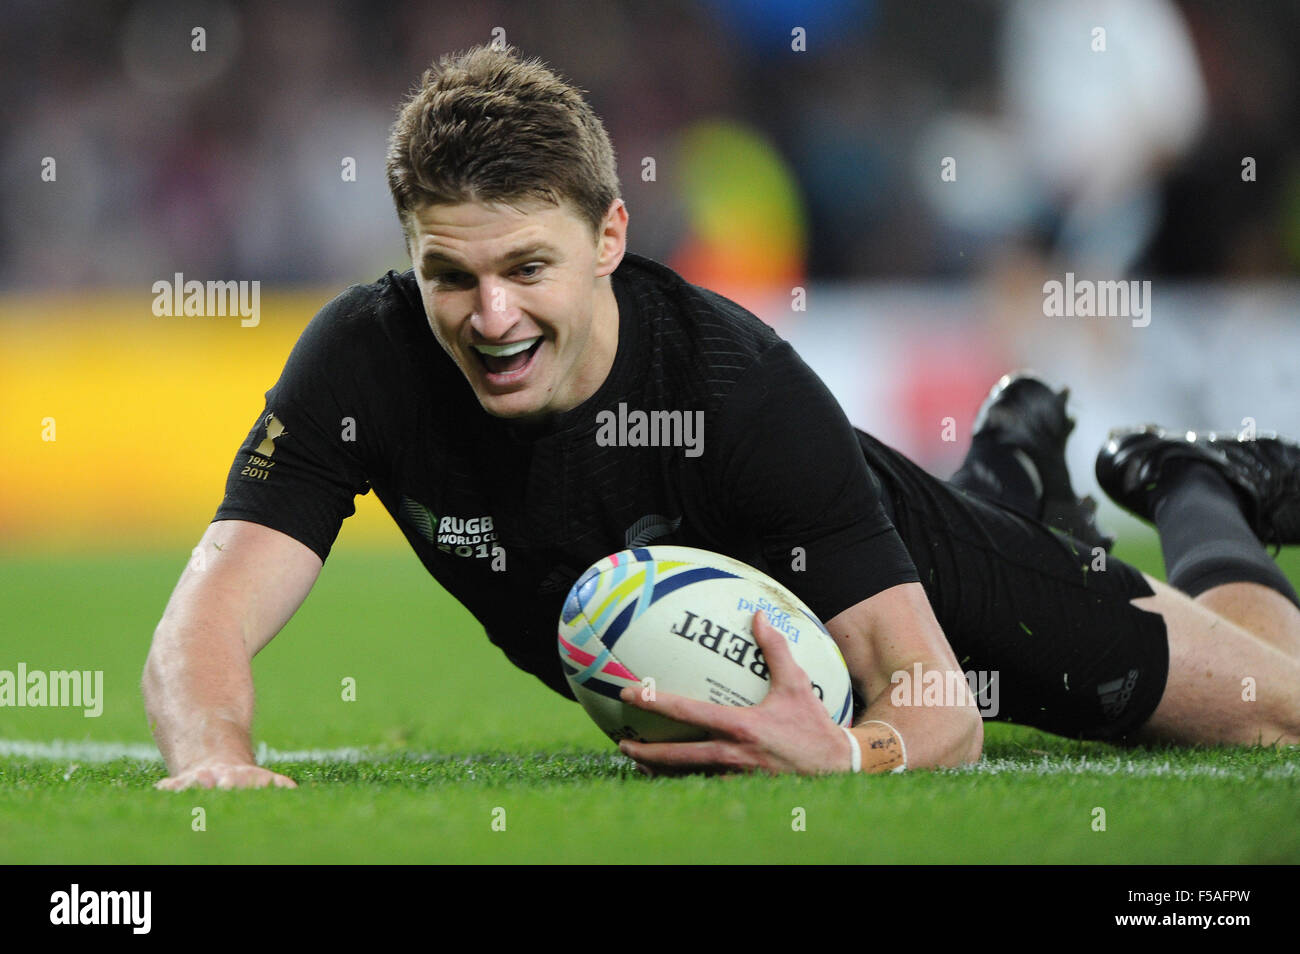 London, UK. 31st October, 2015. Beauden Barrett of New Zealand scores a try  during the Rugby World Cup Final between New Zealand and Australia -  Twickenham Stadium, London. Credit: Cal Sport Media/Alamy